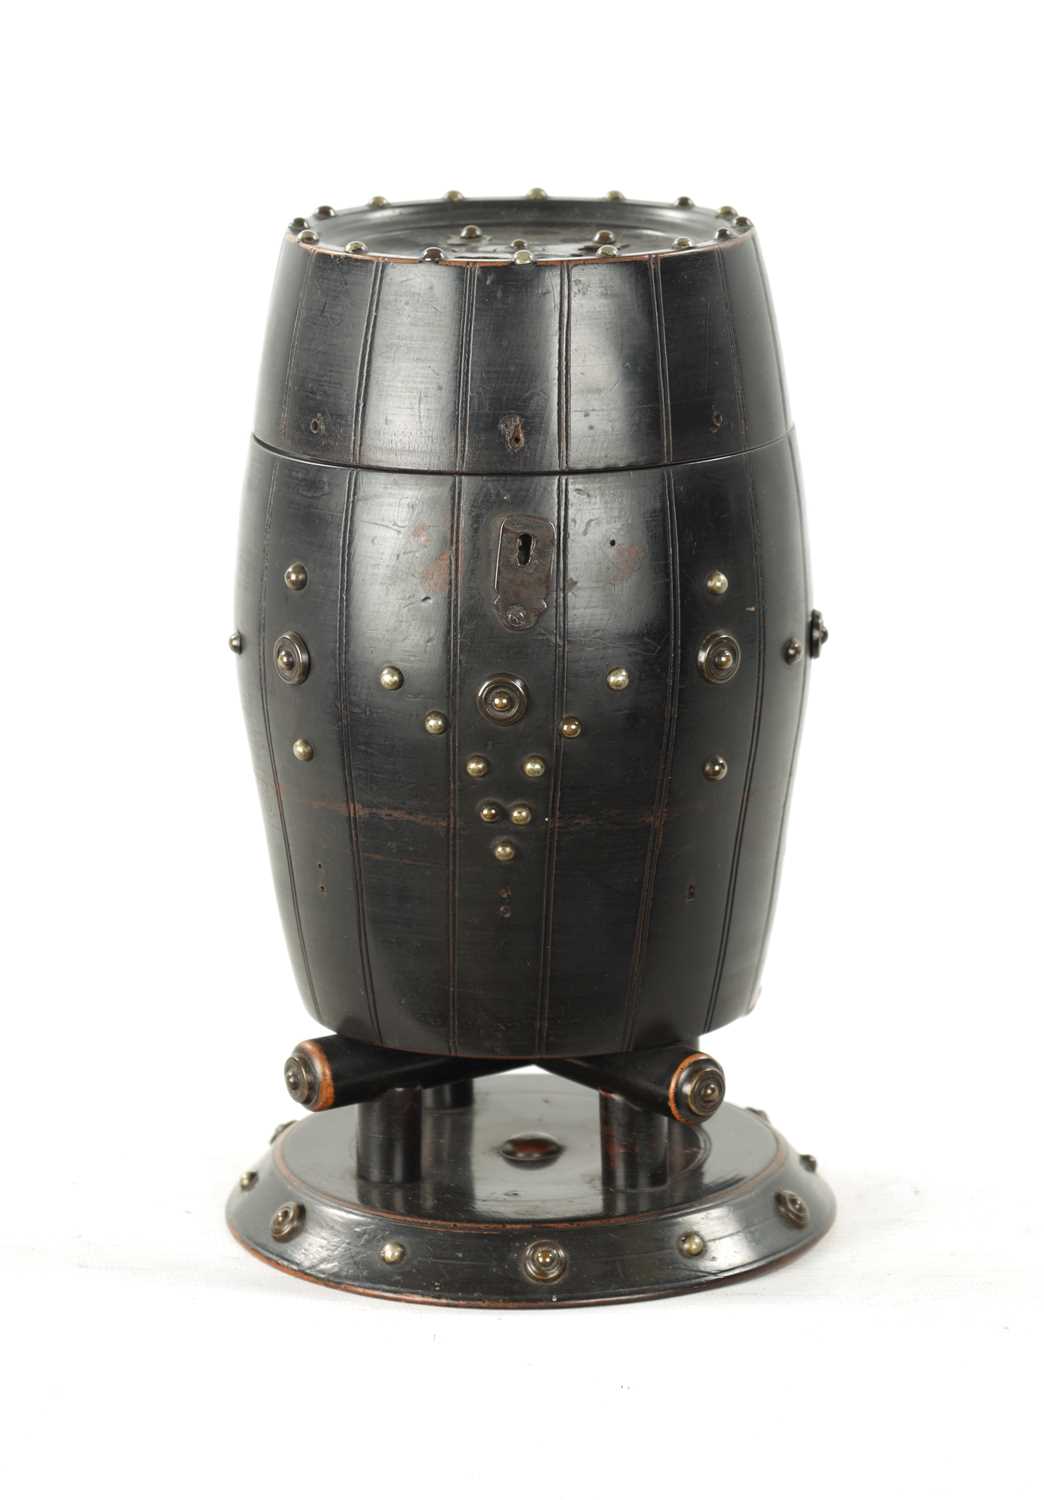 A 19TH CENTURY EBONISED CARVED WOOD TEA CADDY IN THE FORM OF A BARREL